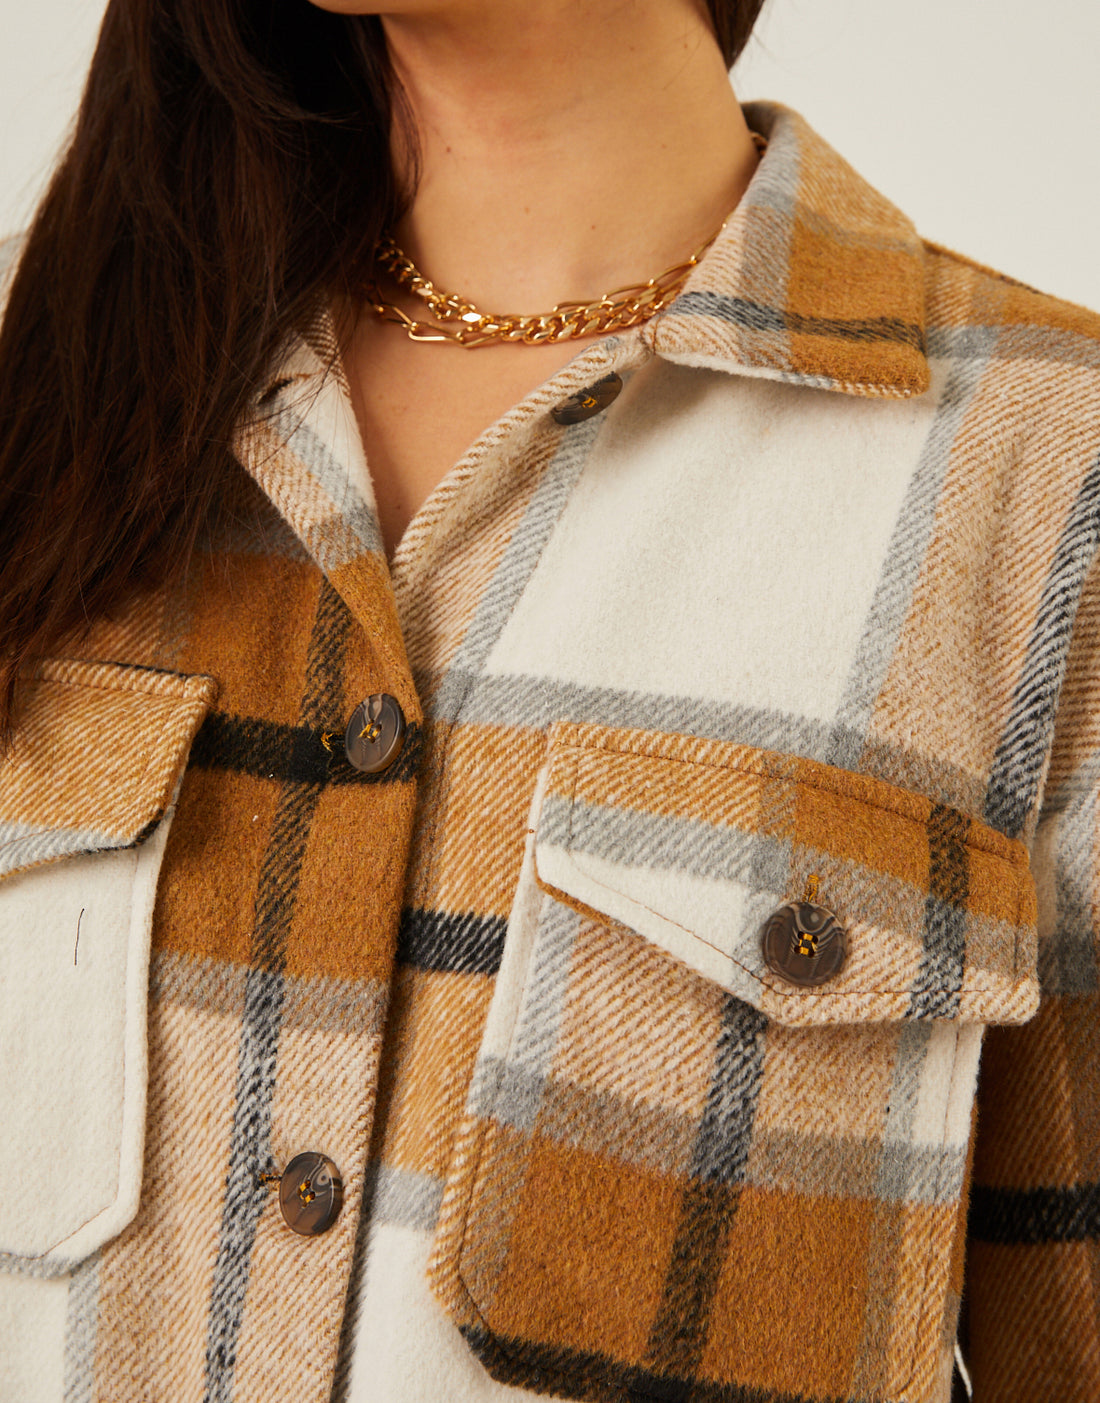 Plaid Button Up Shacket Outerwear -2020AVE